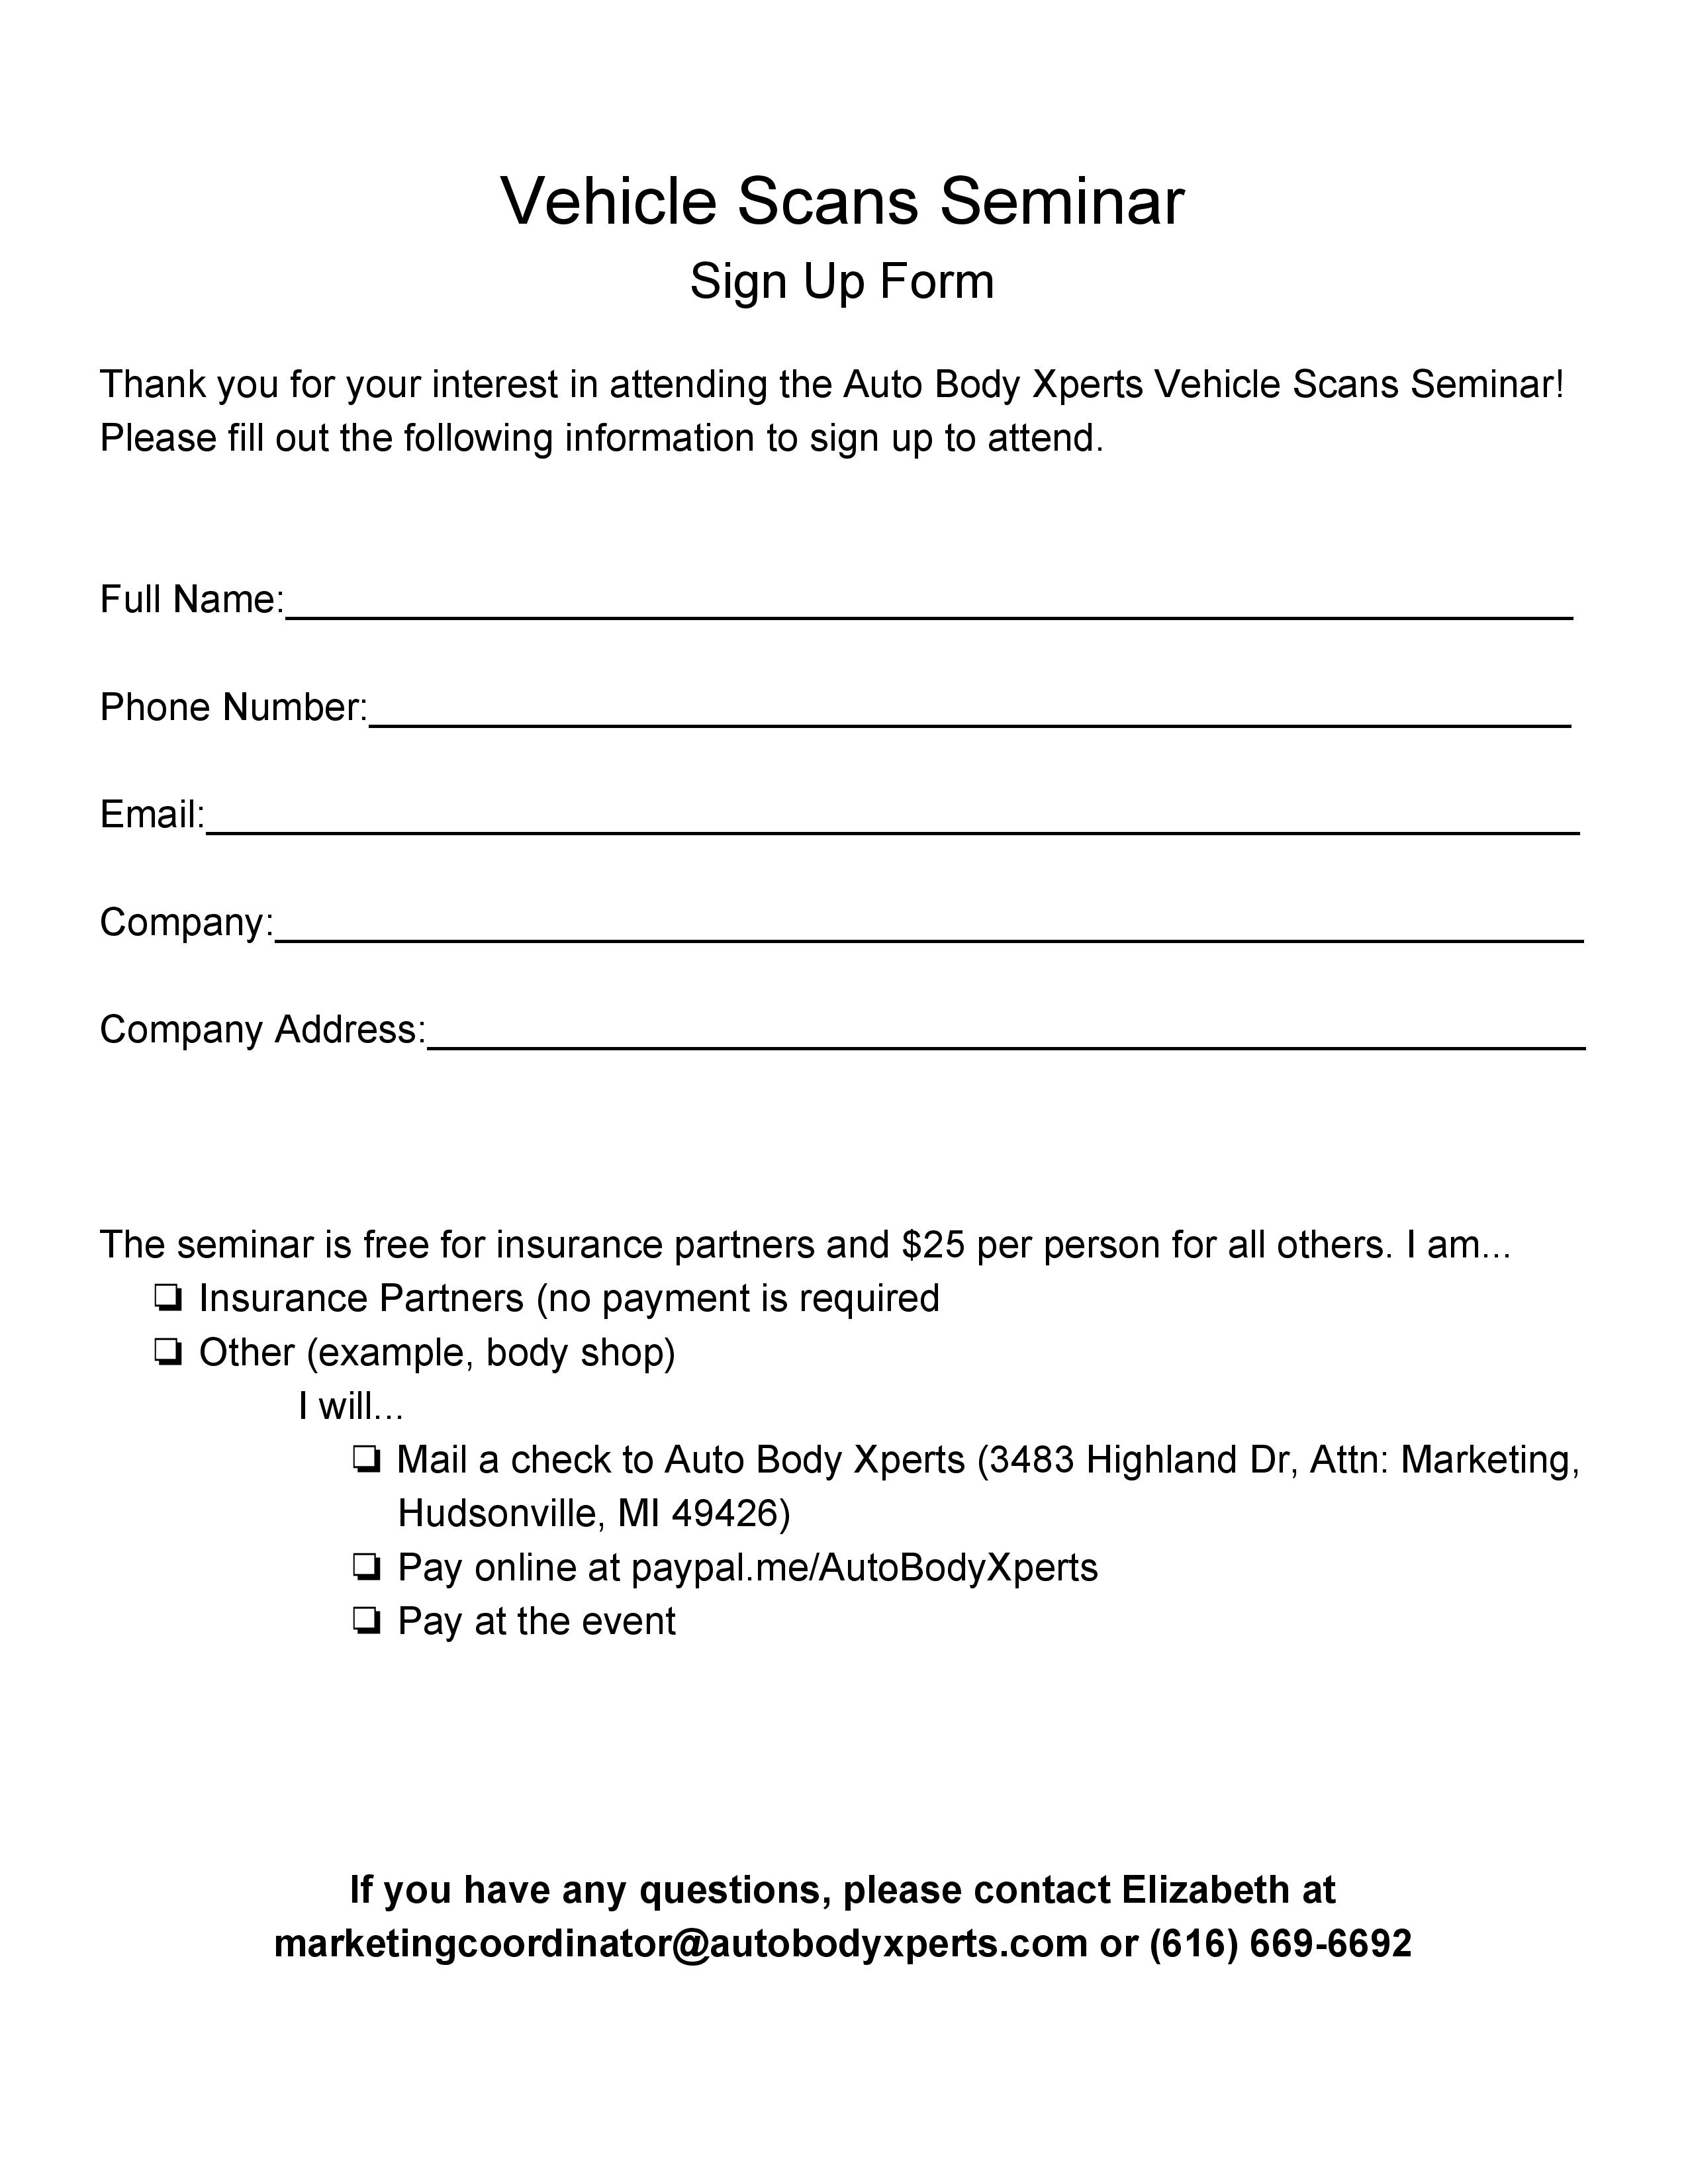 Vehicle Scans Seminar Sign Up Form-page-001